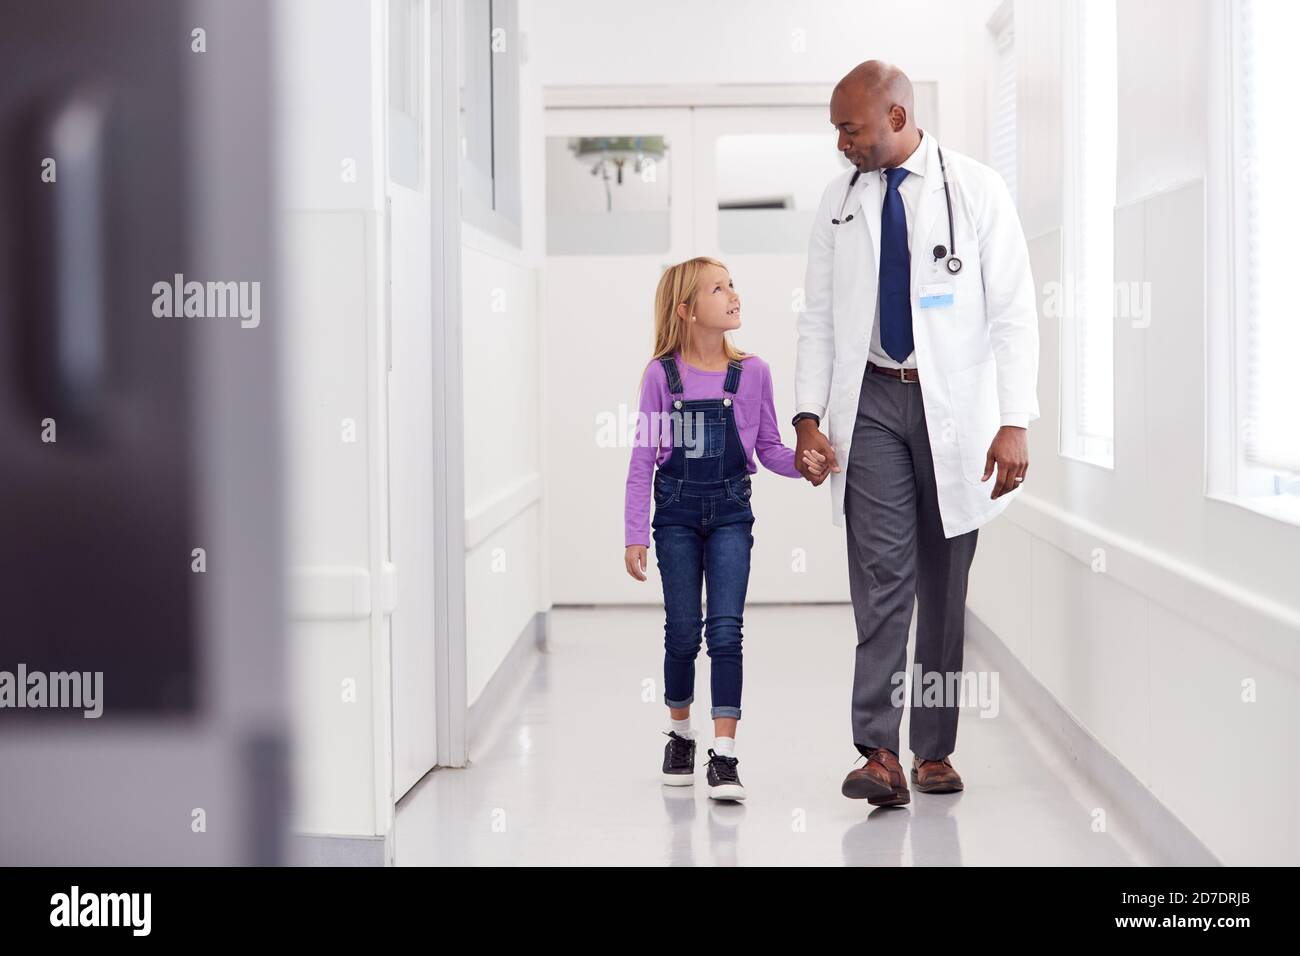 Male Paediatric Doctor Walking Along Hospital Corridor Holding Hands With Young Girl Patient Stock Photo